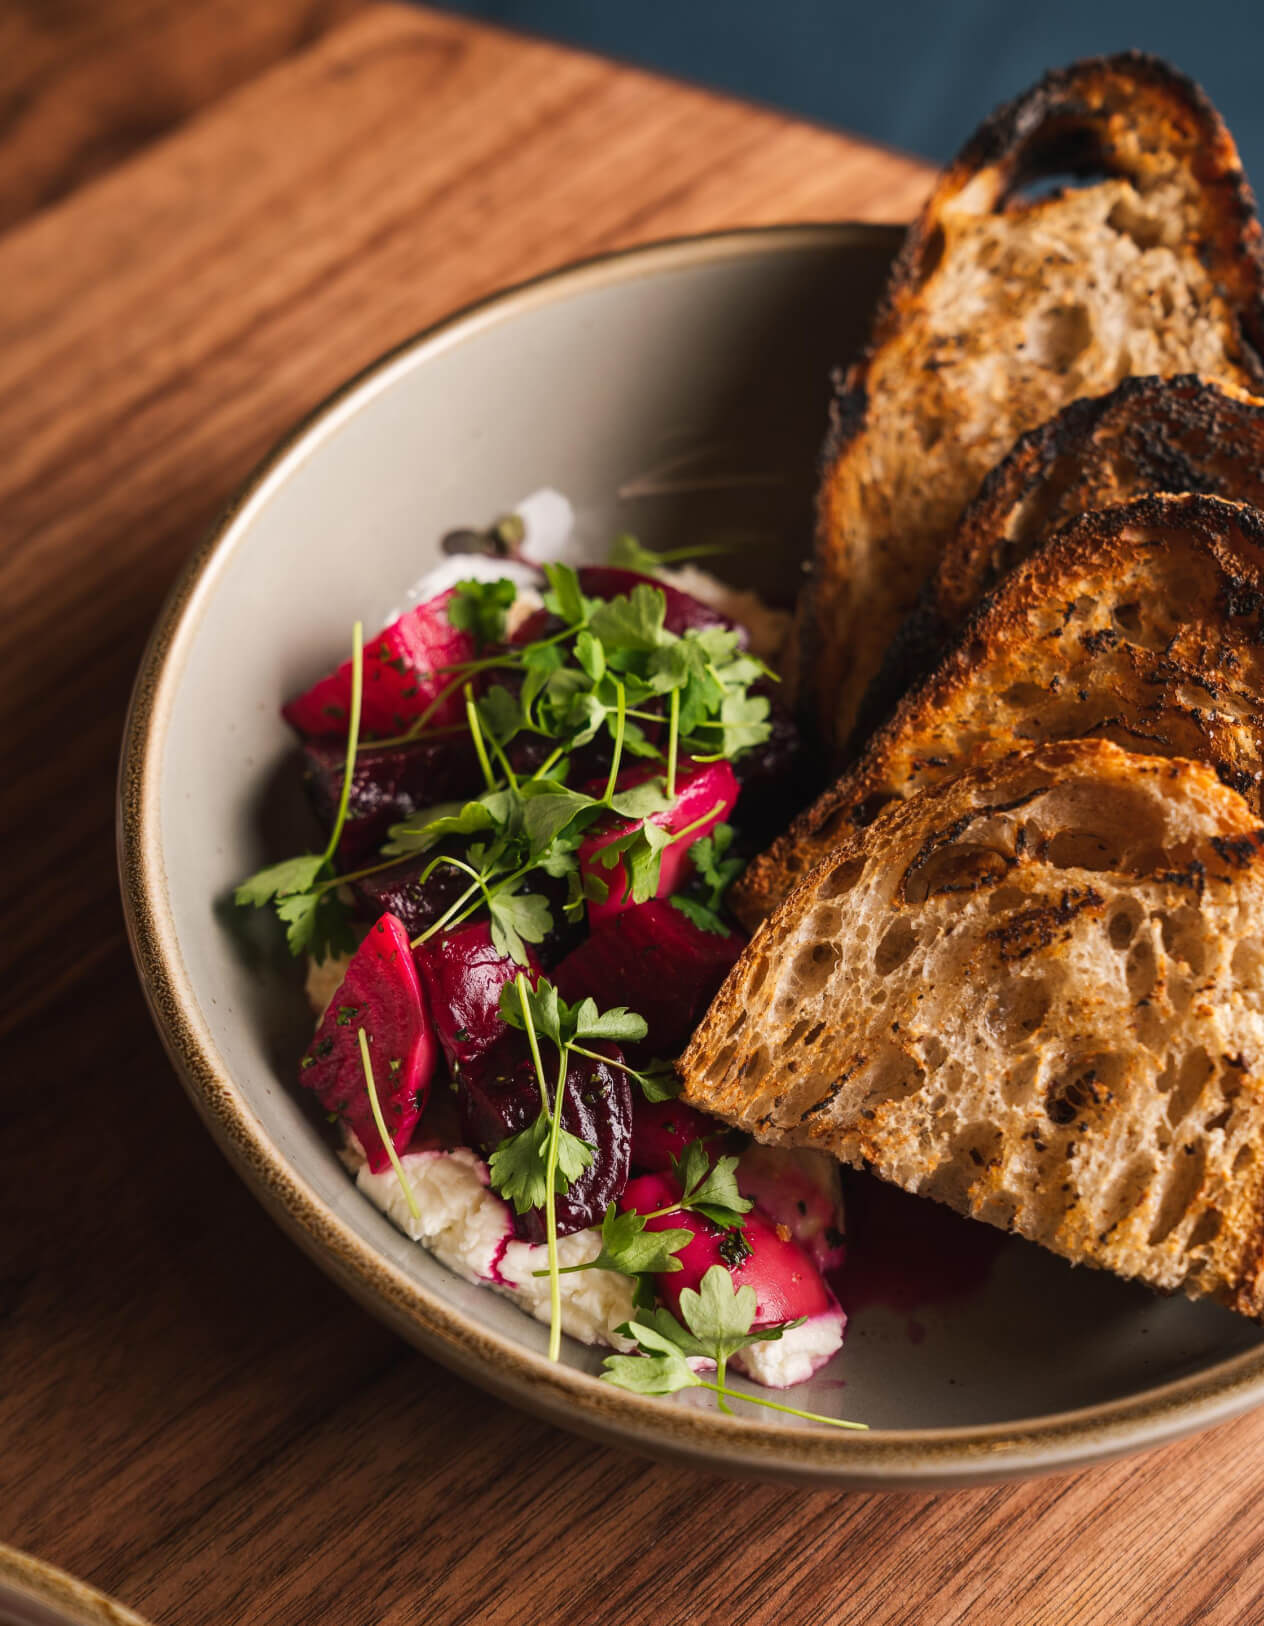 Four pieces of toast sit in a grey bowl. To the left of the toast is a white puree with a pile of bright red beets on top of it that is garnished with green veggies. Everything is on top of a wood-grained table.